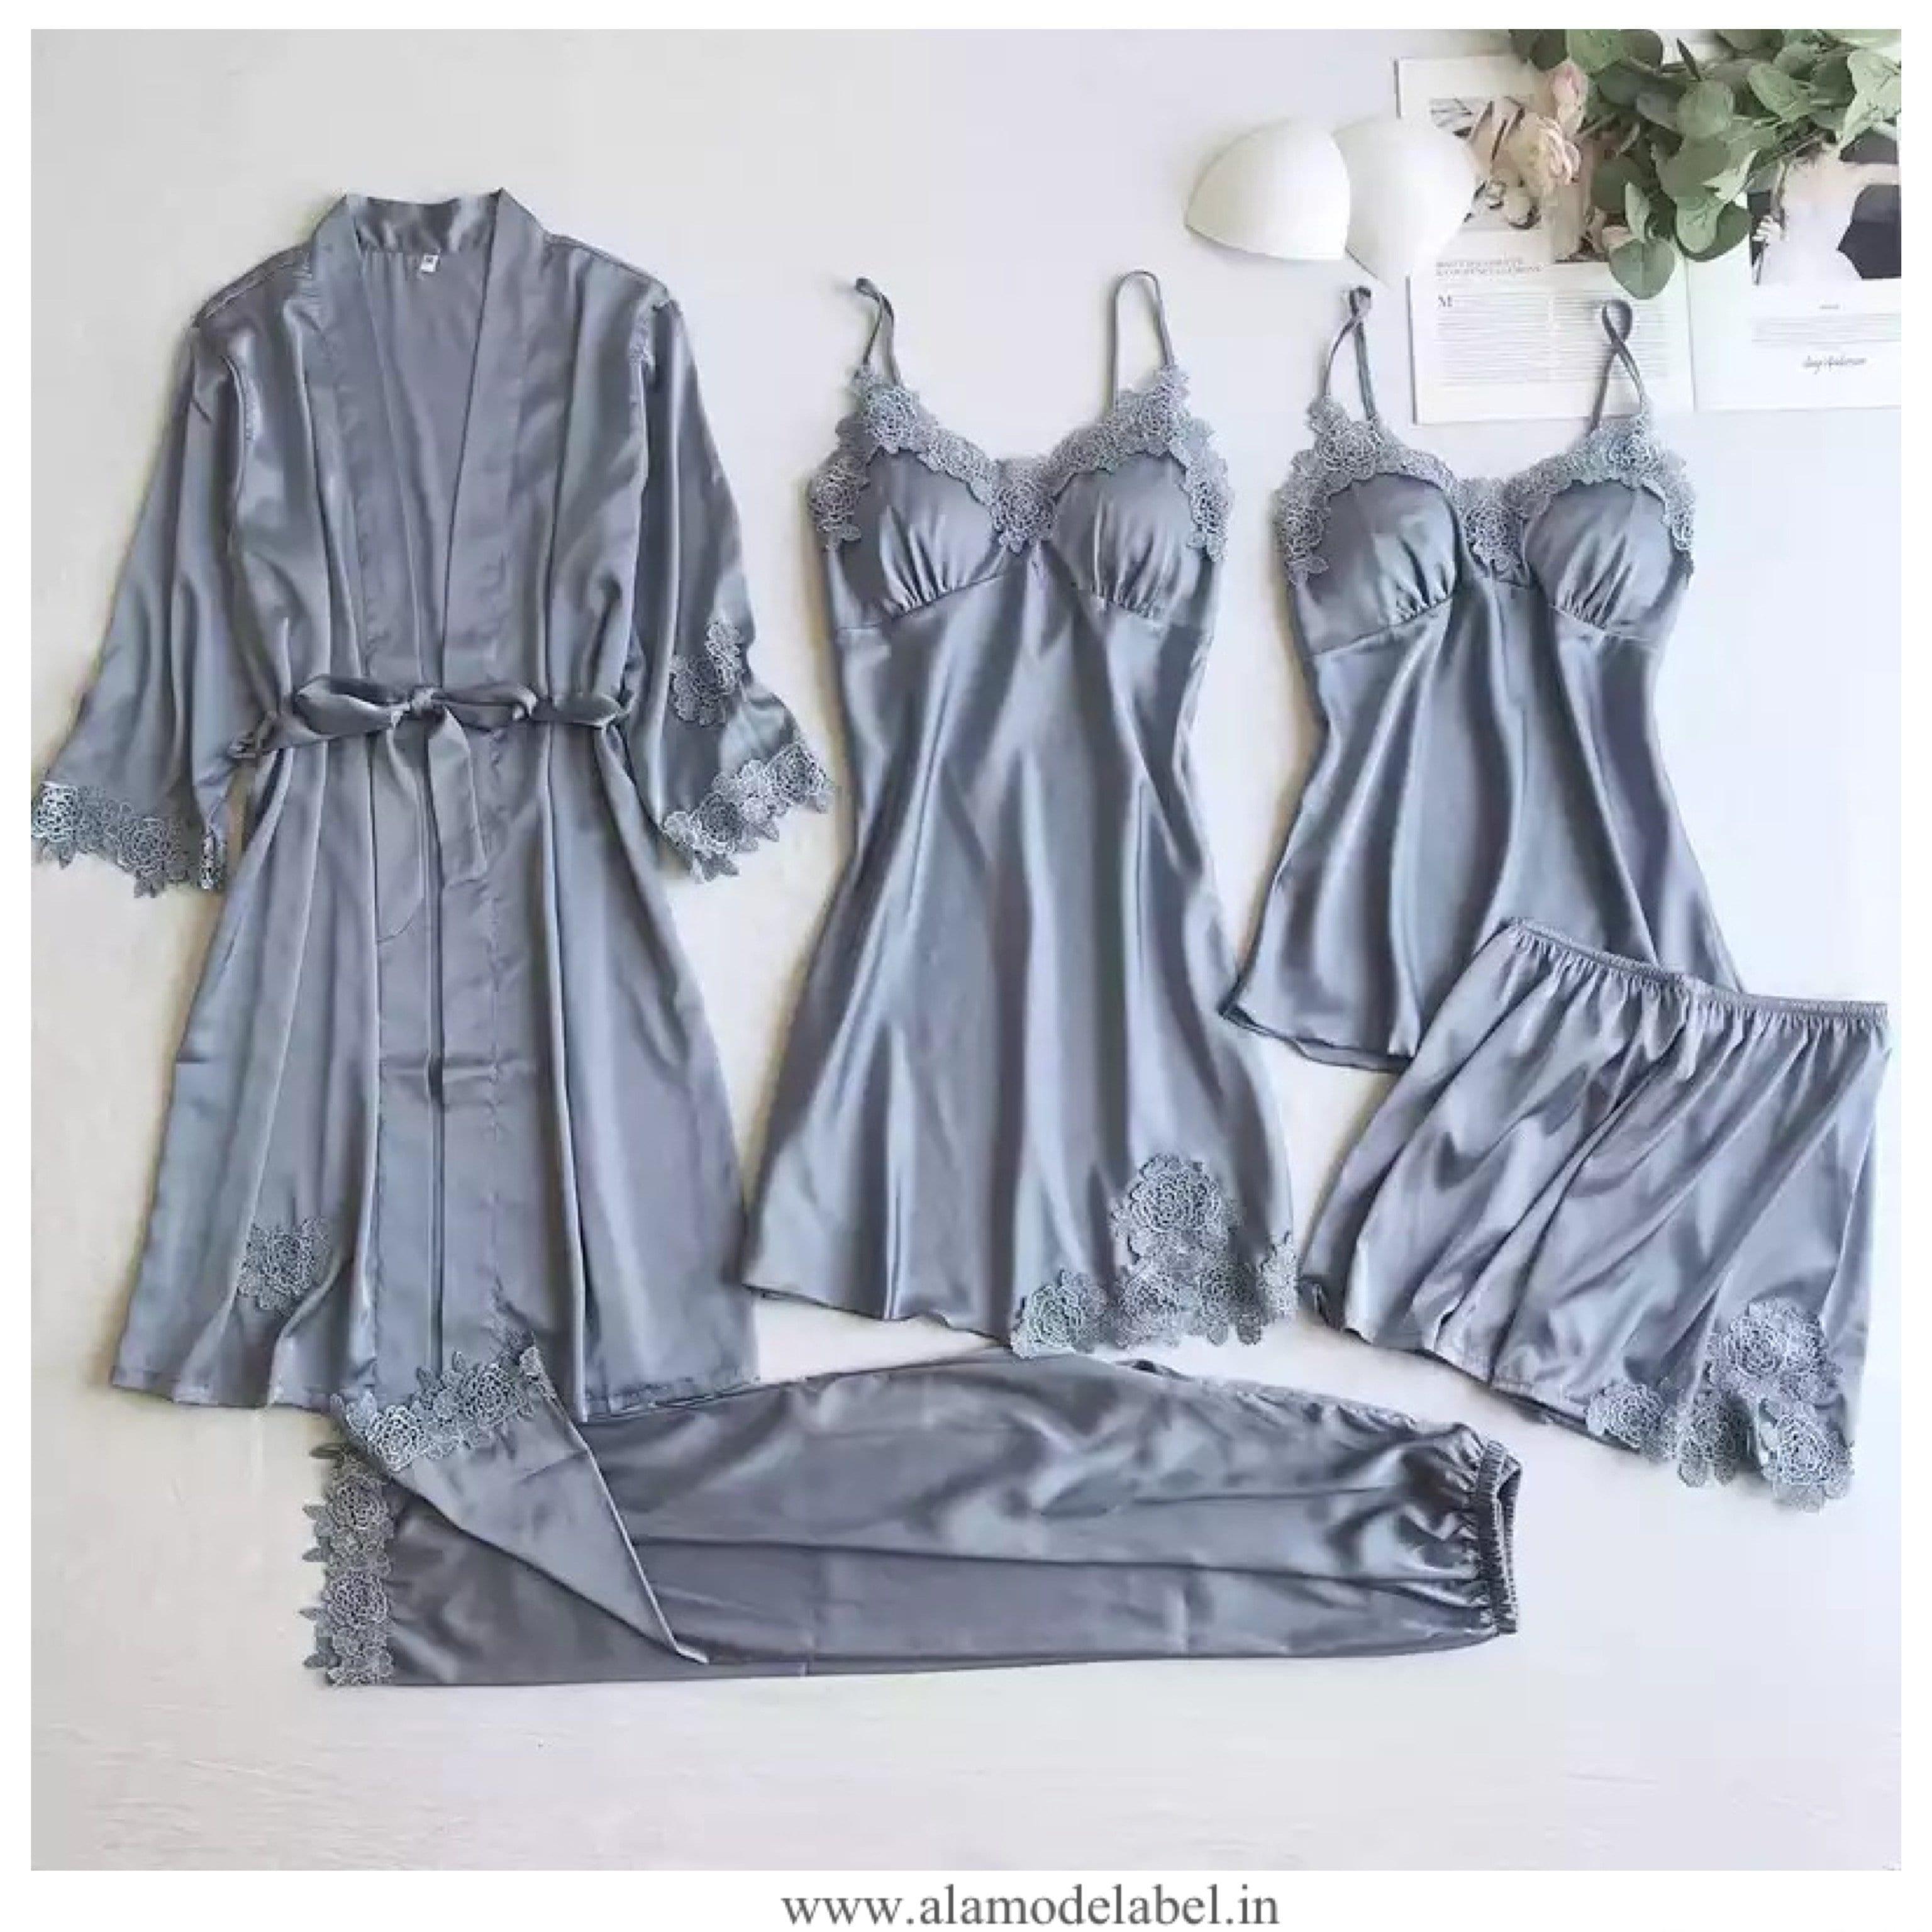 Women's Satin Embroidered Two Piece Nighty with Robe, Night Gown